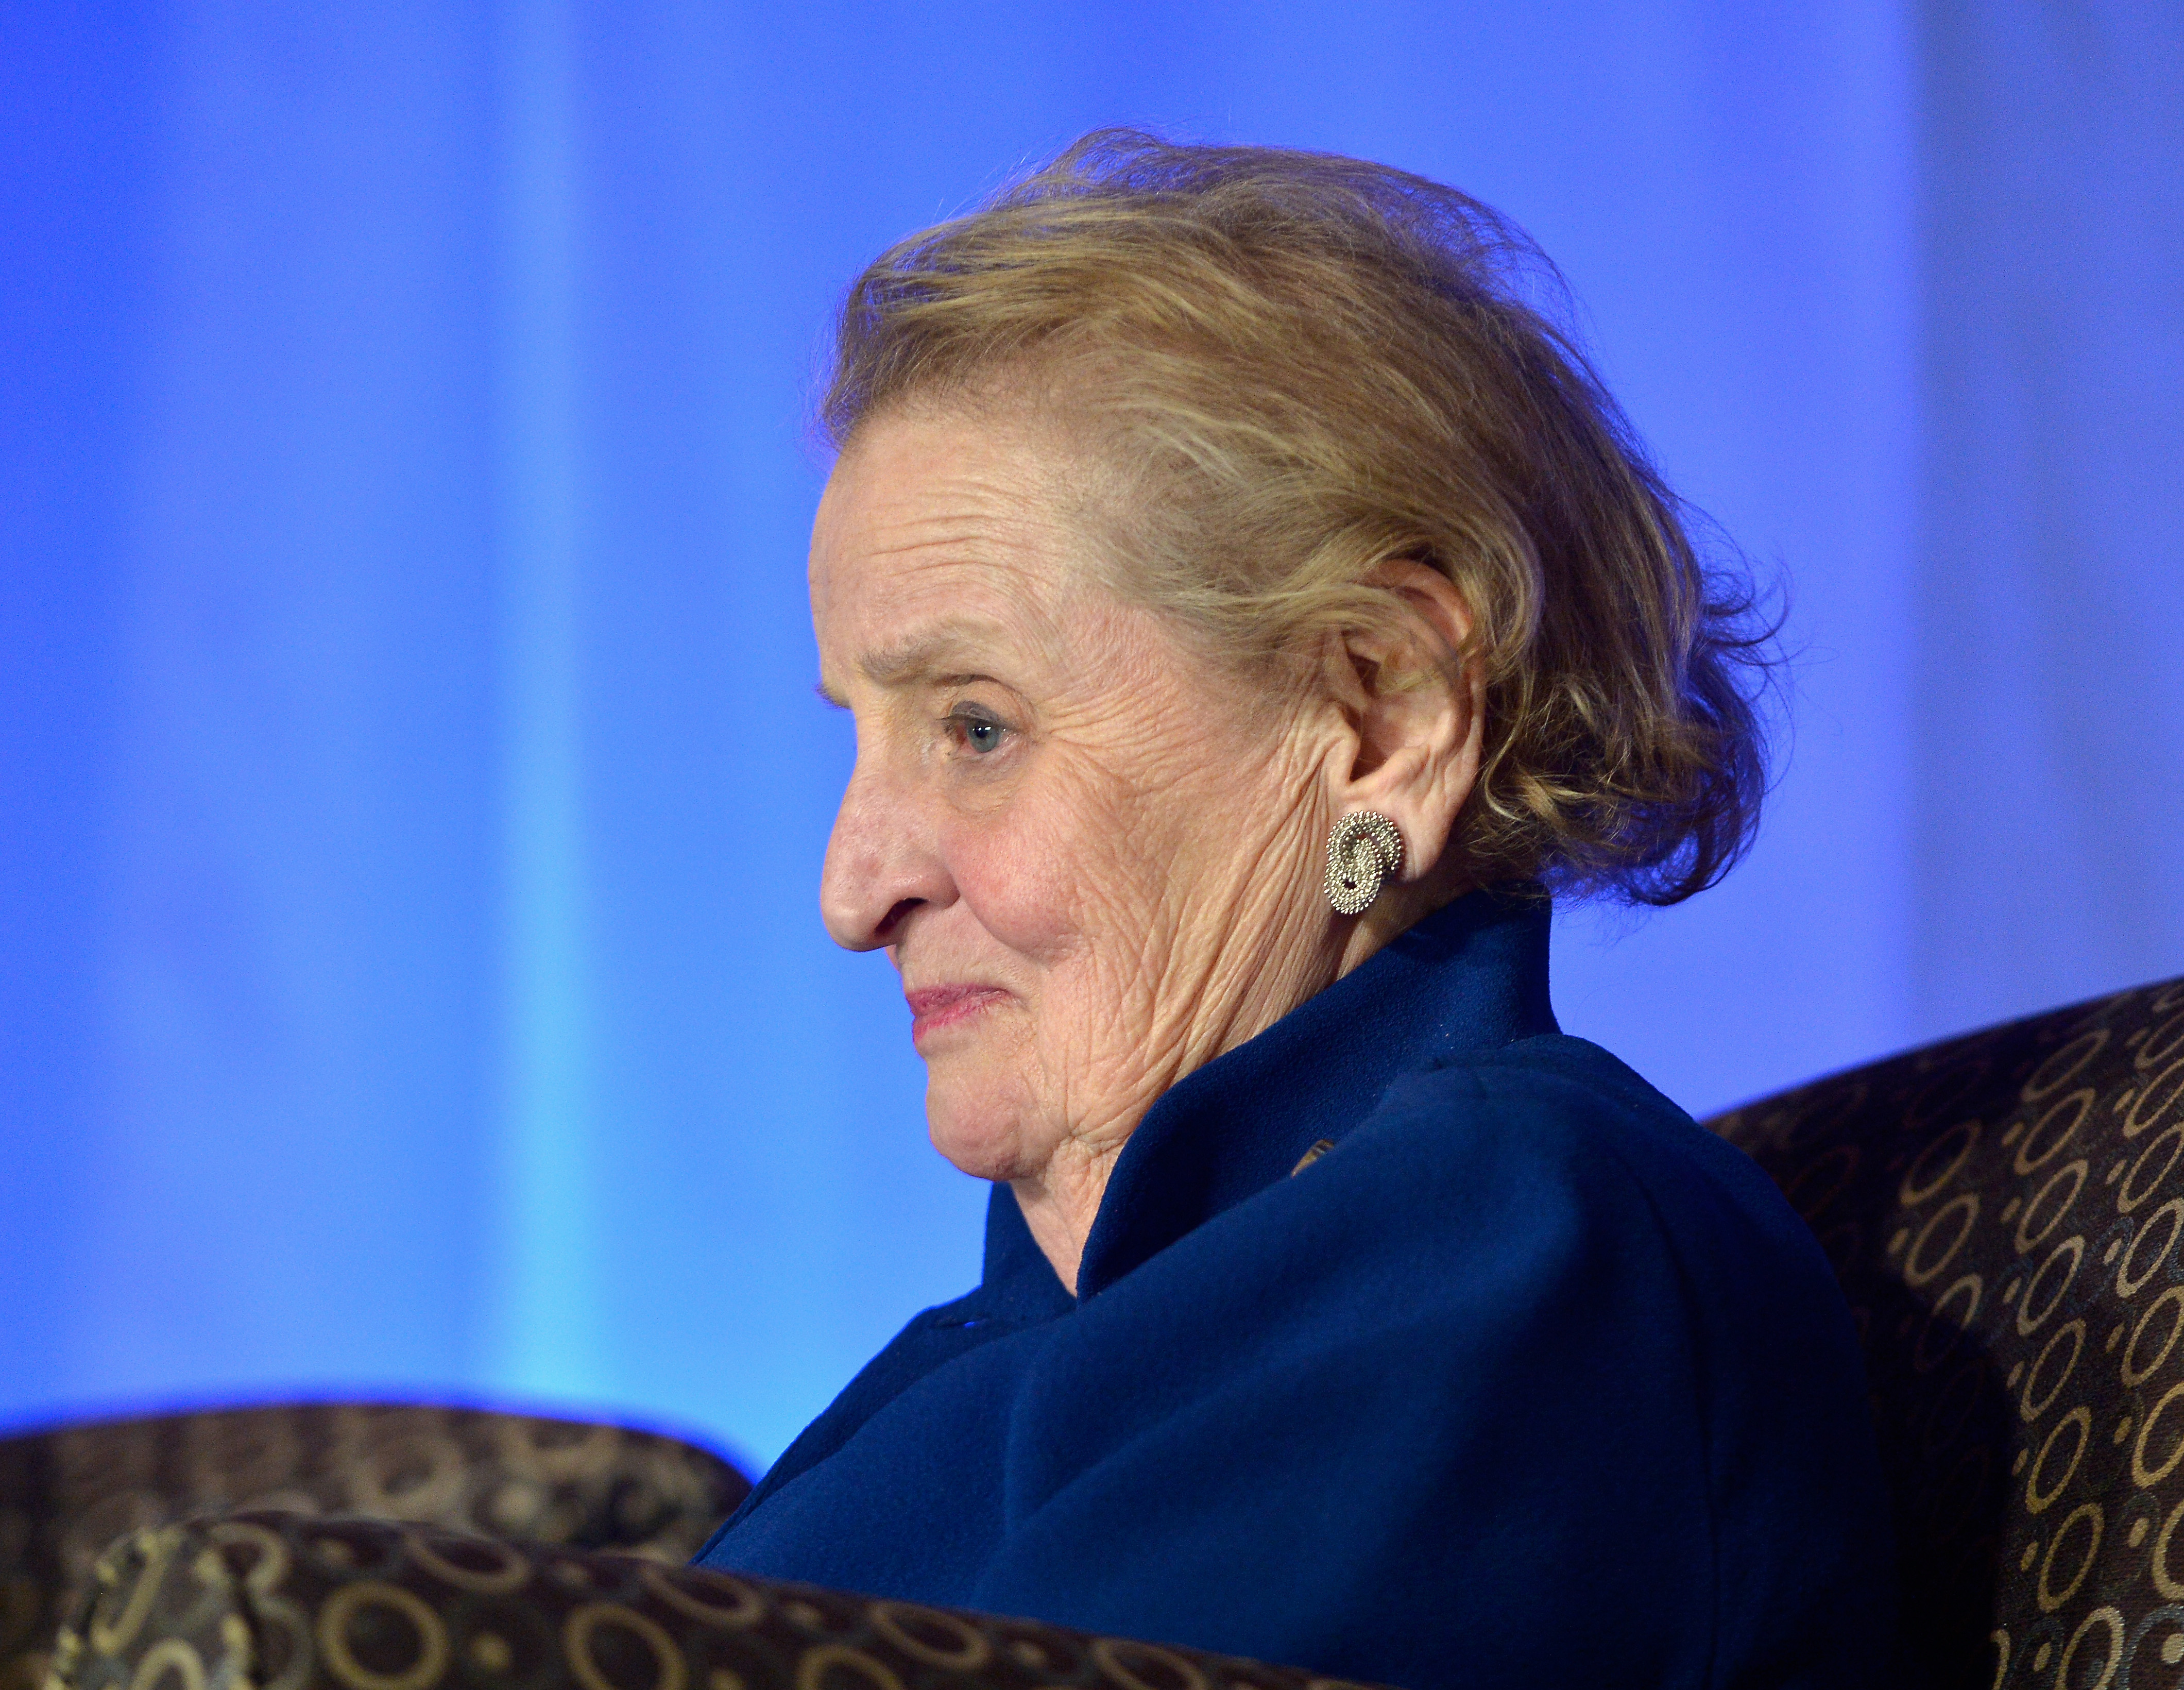 Former U.S. Secratary of State Madeleine K. Albright speaks at the Albright Institute Presents 'A Public Dialogue: Addressing Global Inequality' at Wellesly College in Wellesley, Mass., on Jan. 31, 2016.